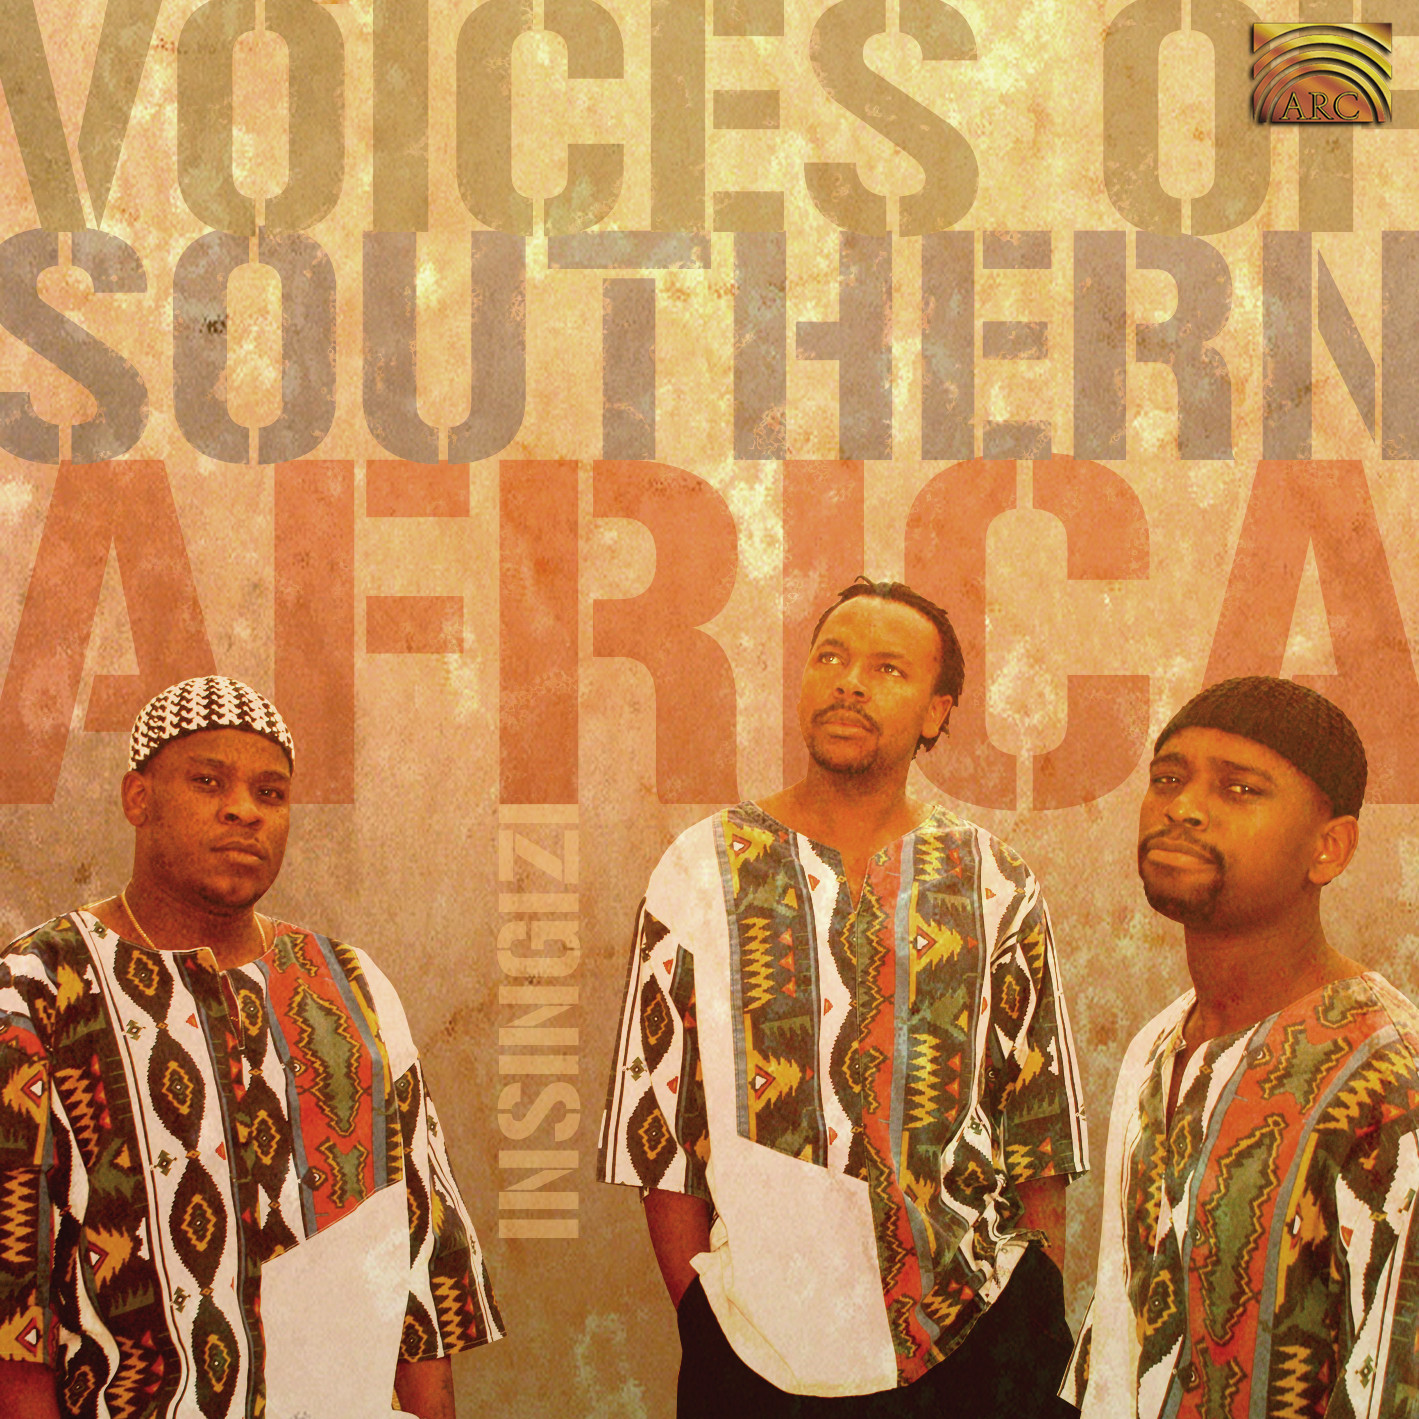 EUCD1855 Voices of Southern Africa